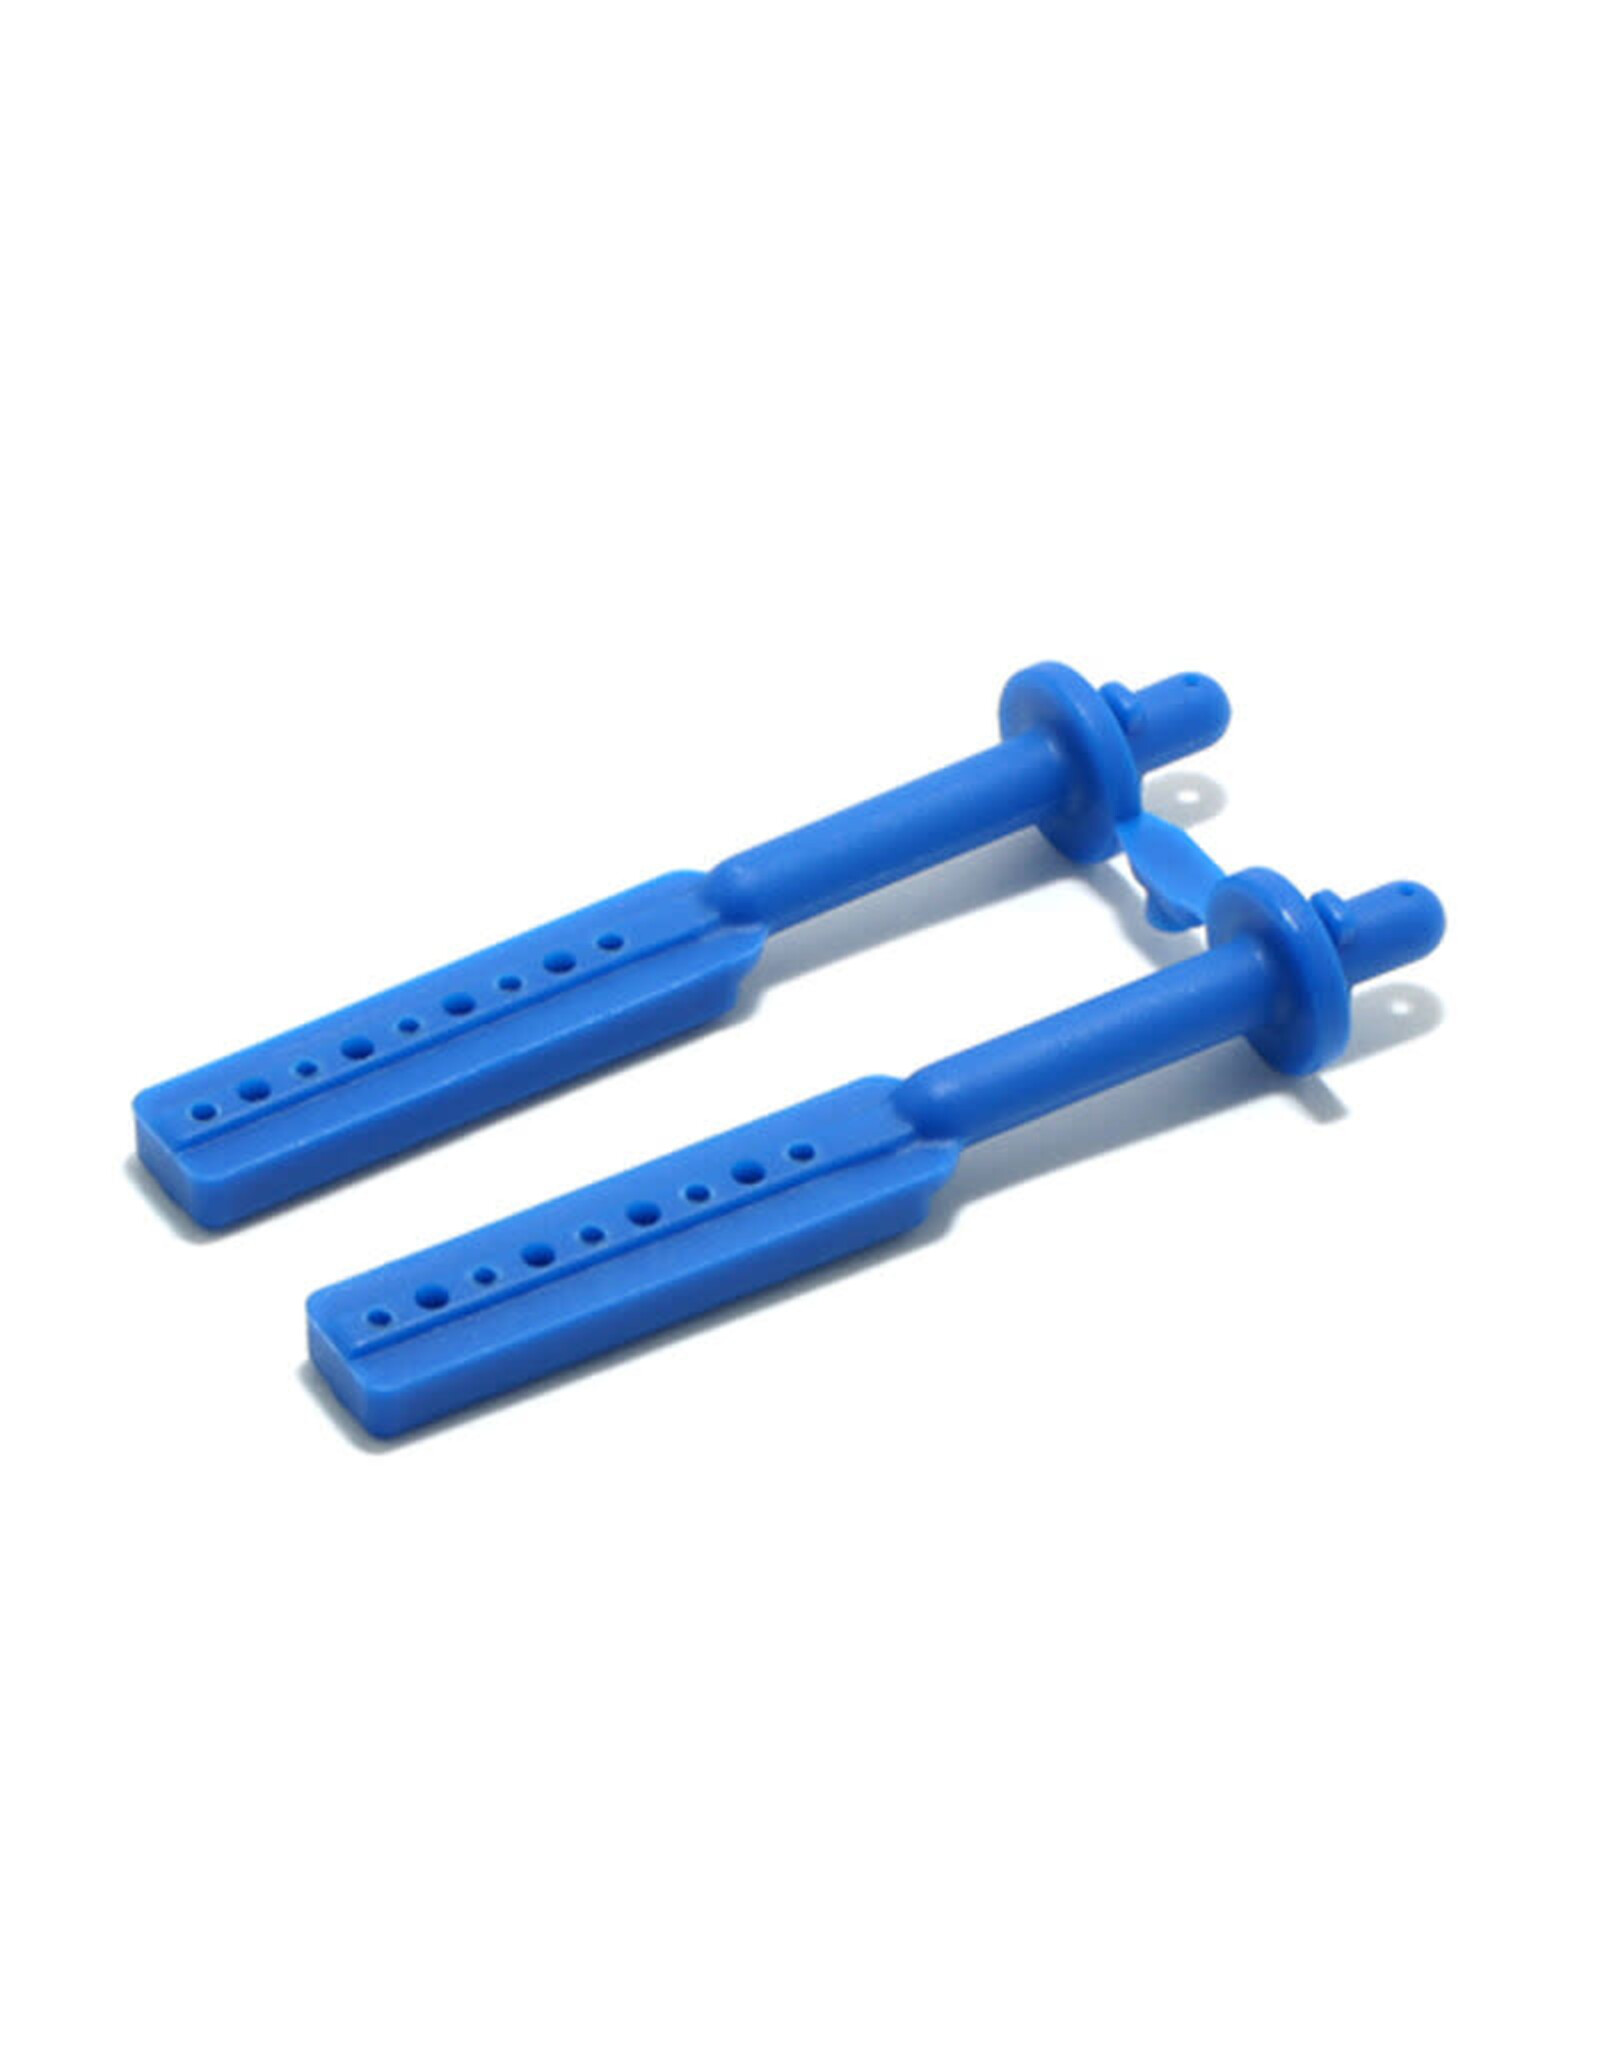 RPM Long Body Mounts - Blue fits all T/E-Maxx for use with RPM Shock Towers only